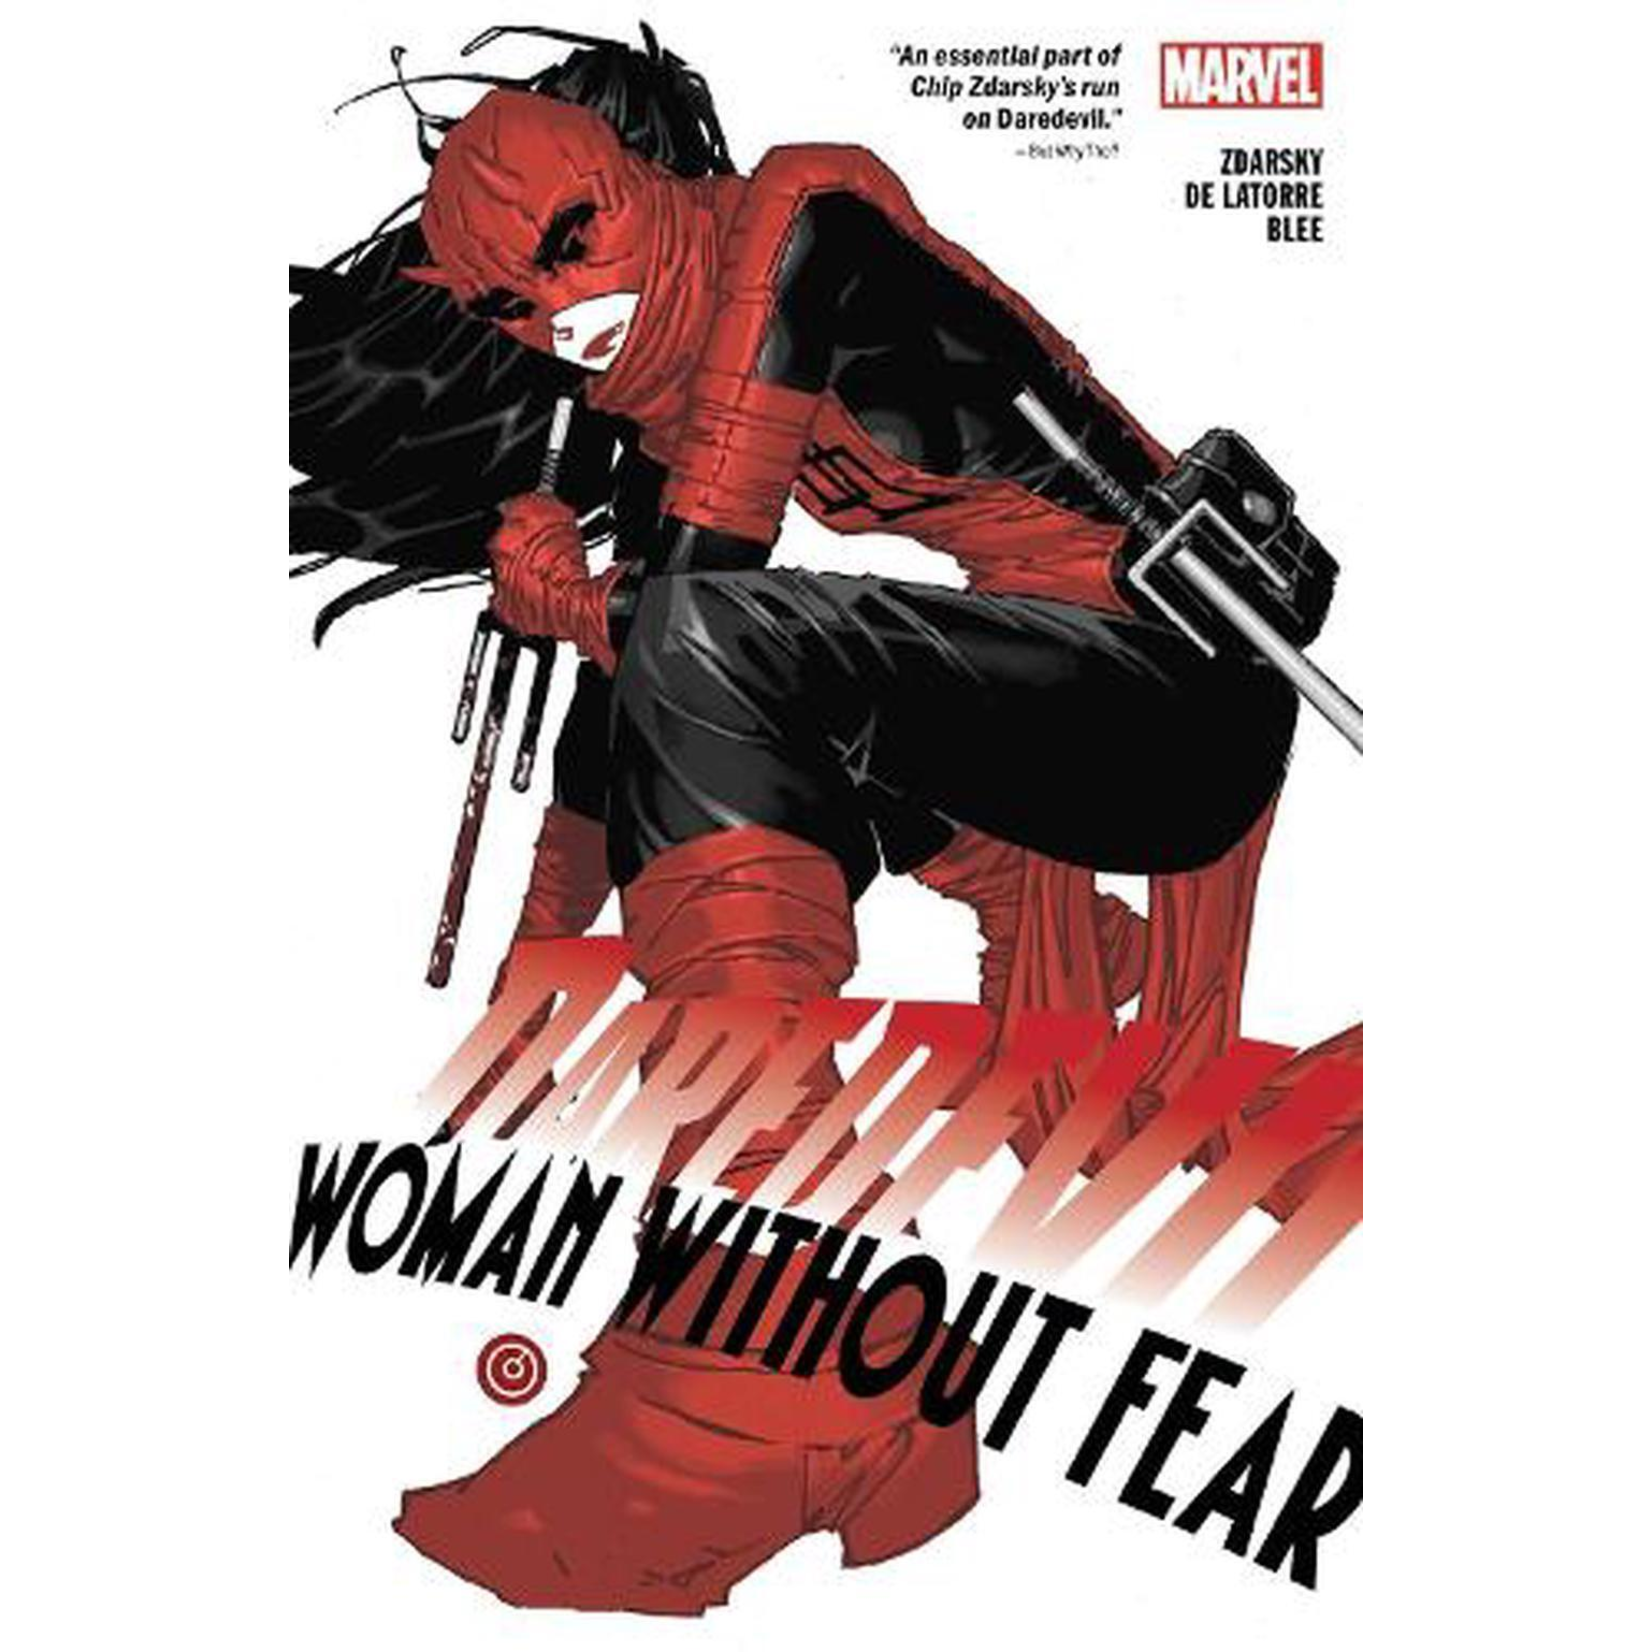 Marvel Daredevil: Woman Without Fear TP